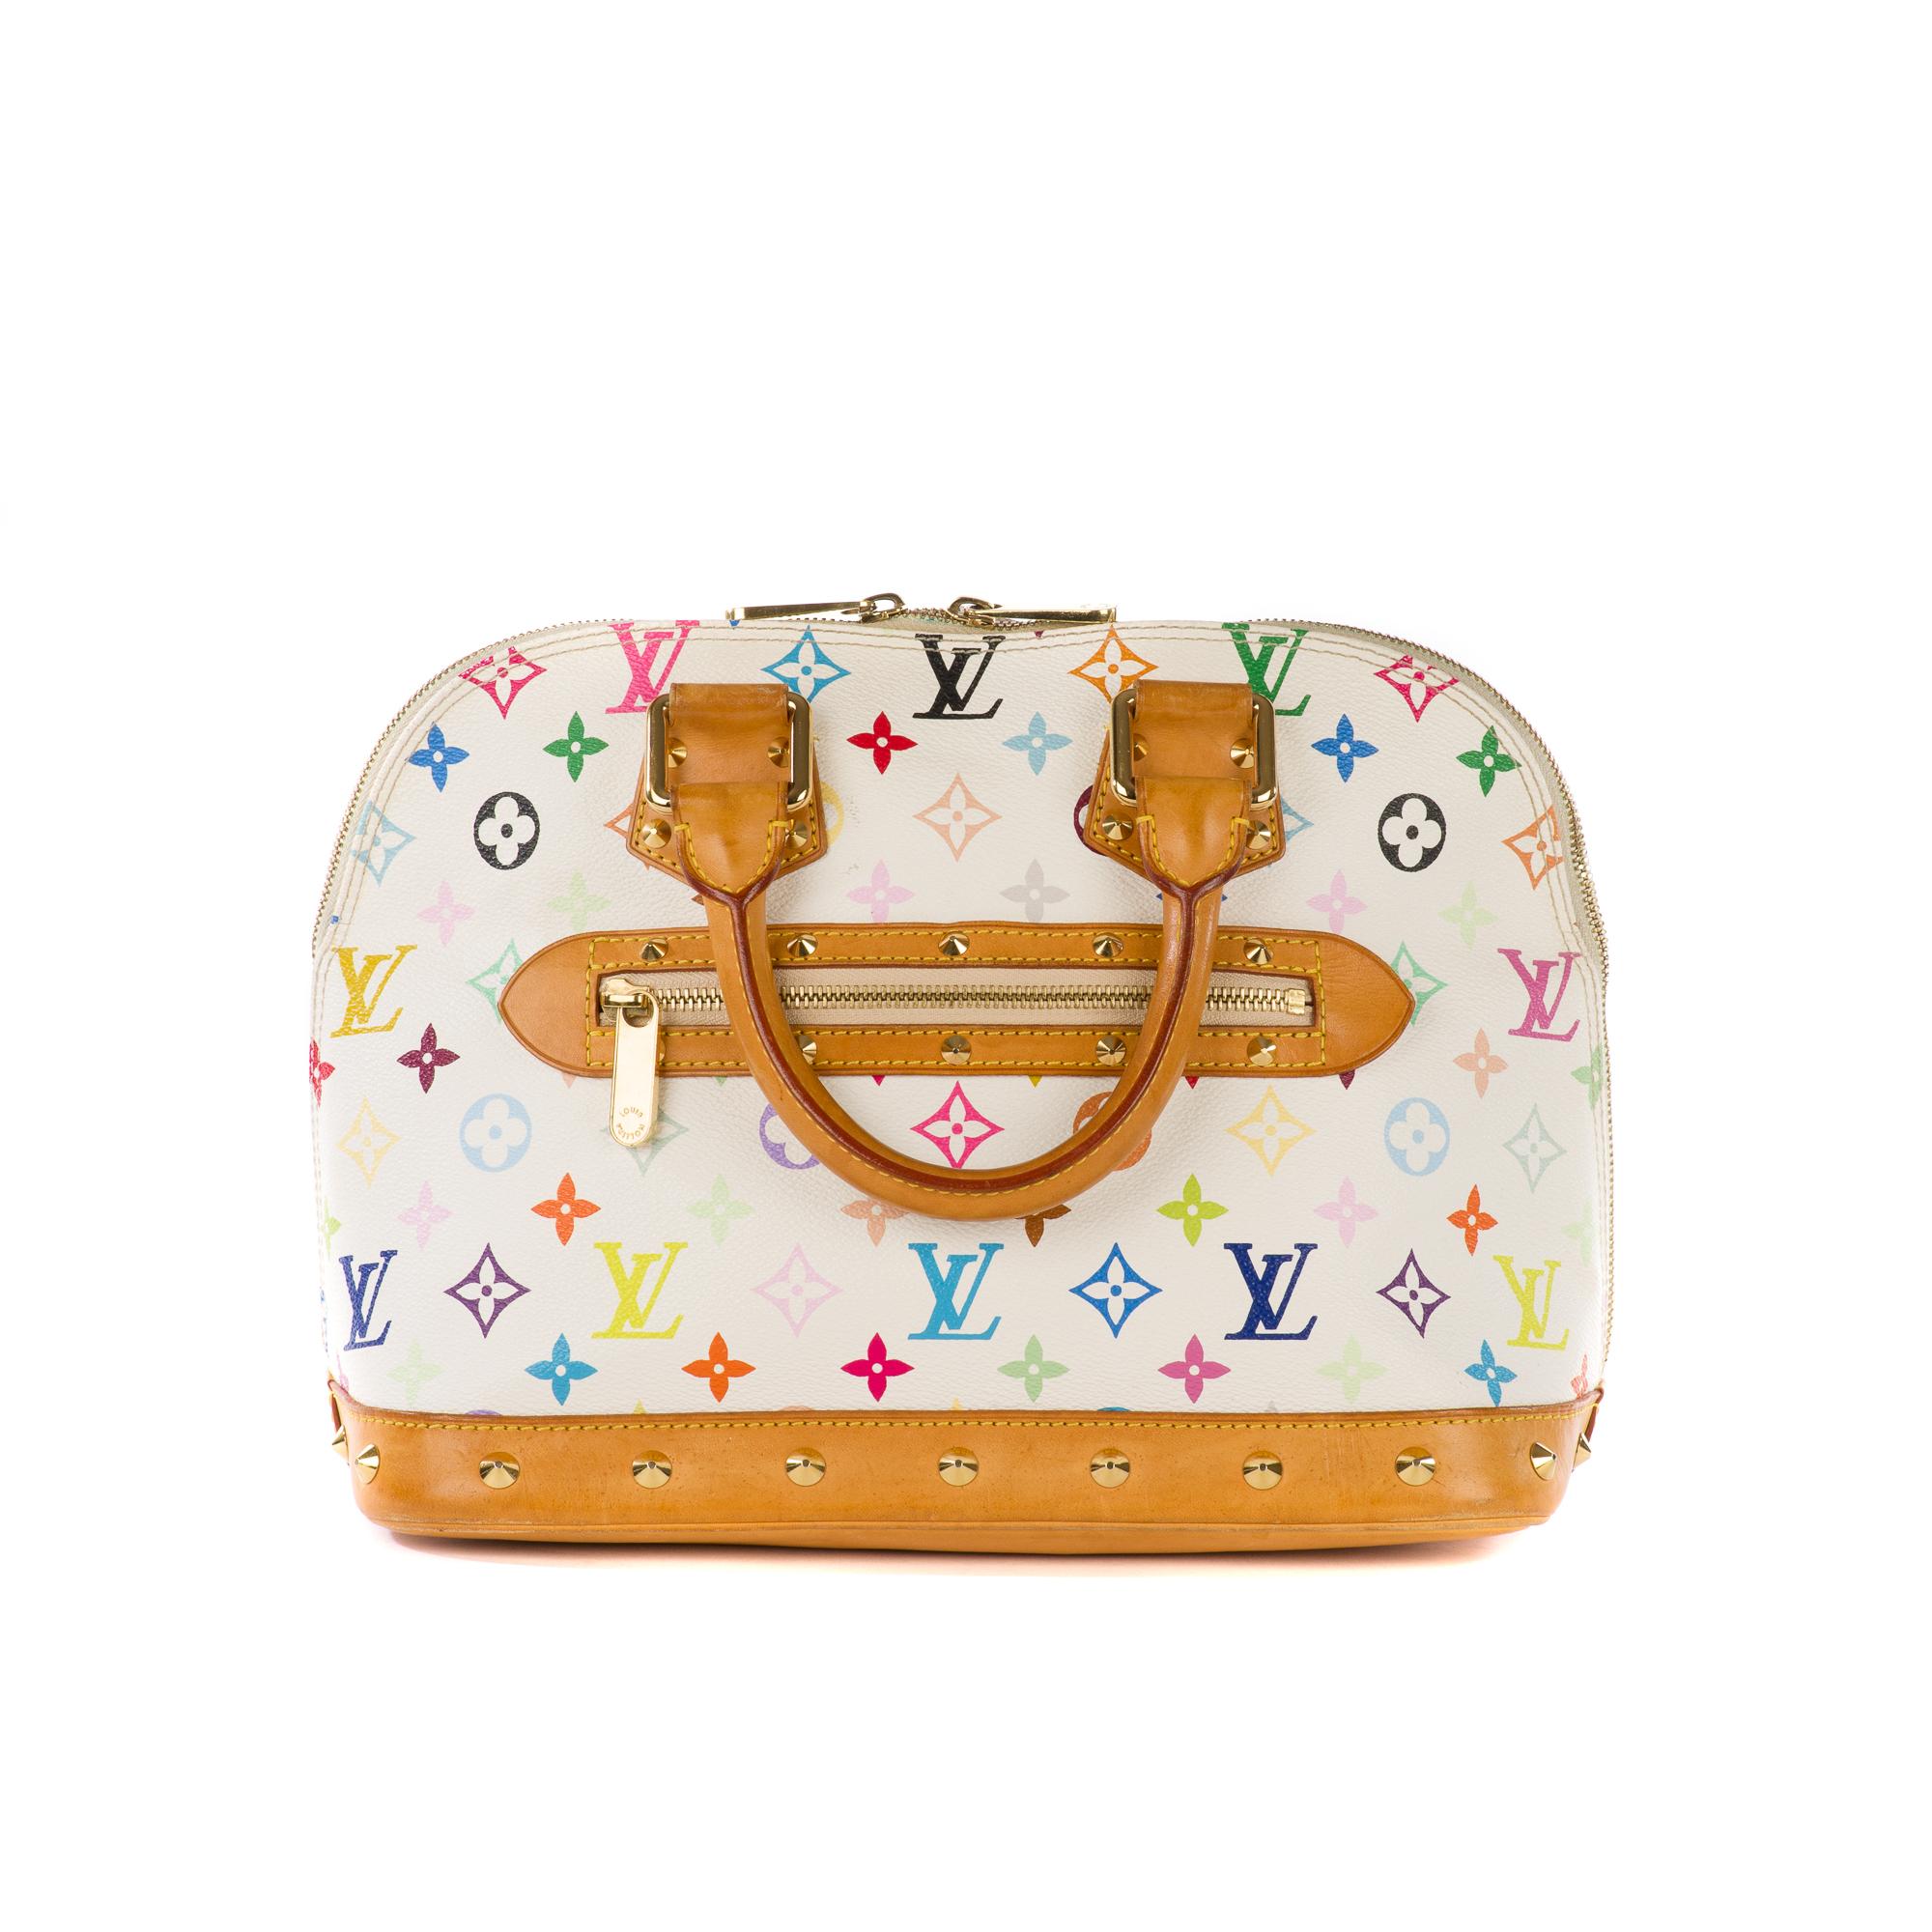 This Murakami made version of the popular Alma by Louis Vuitton is both colorful and edgy. Made from white multicolored monogram canvas with beige leather trim, the exterior also features a top zip closure with double zipper pulls, rolled double